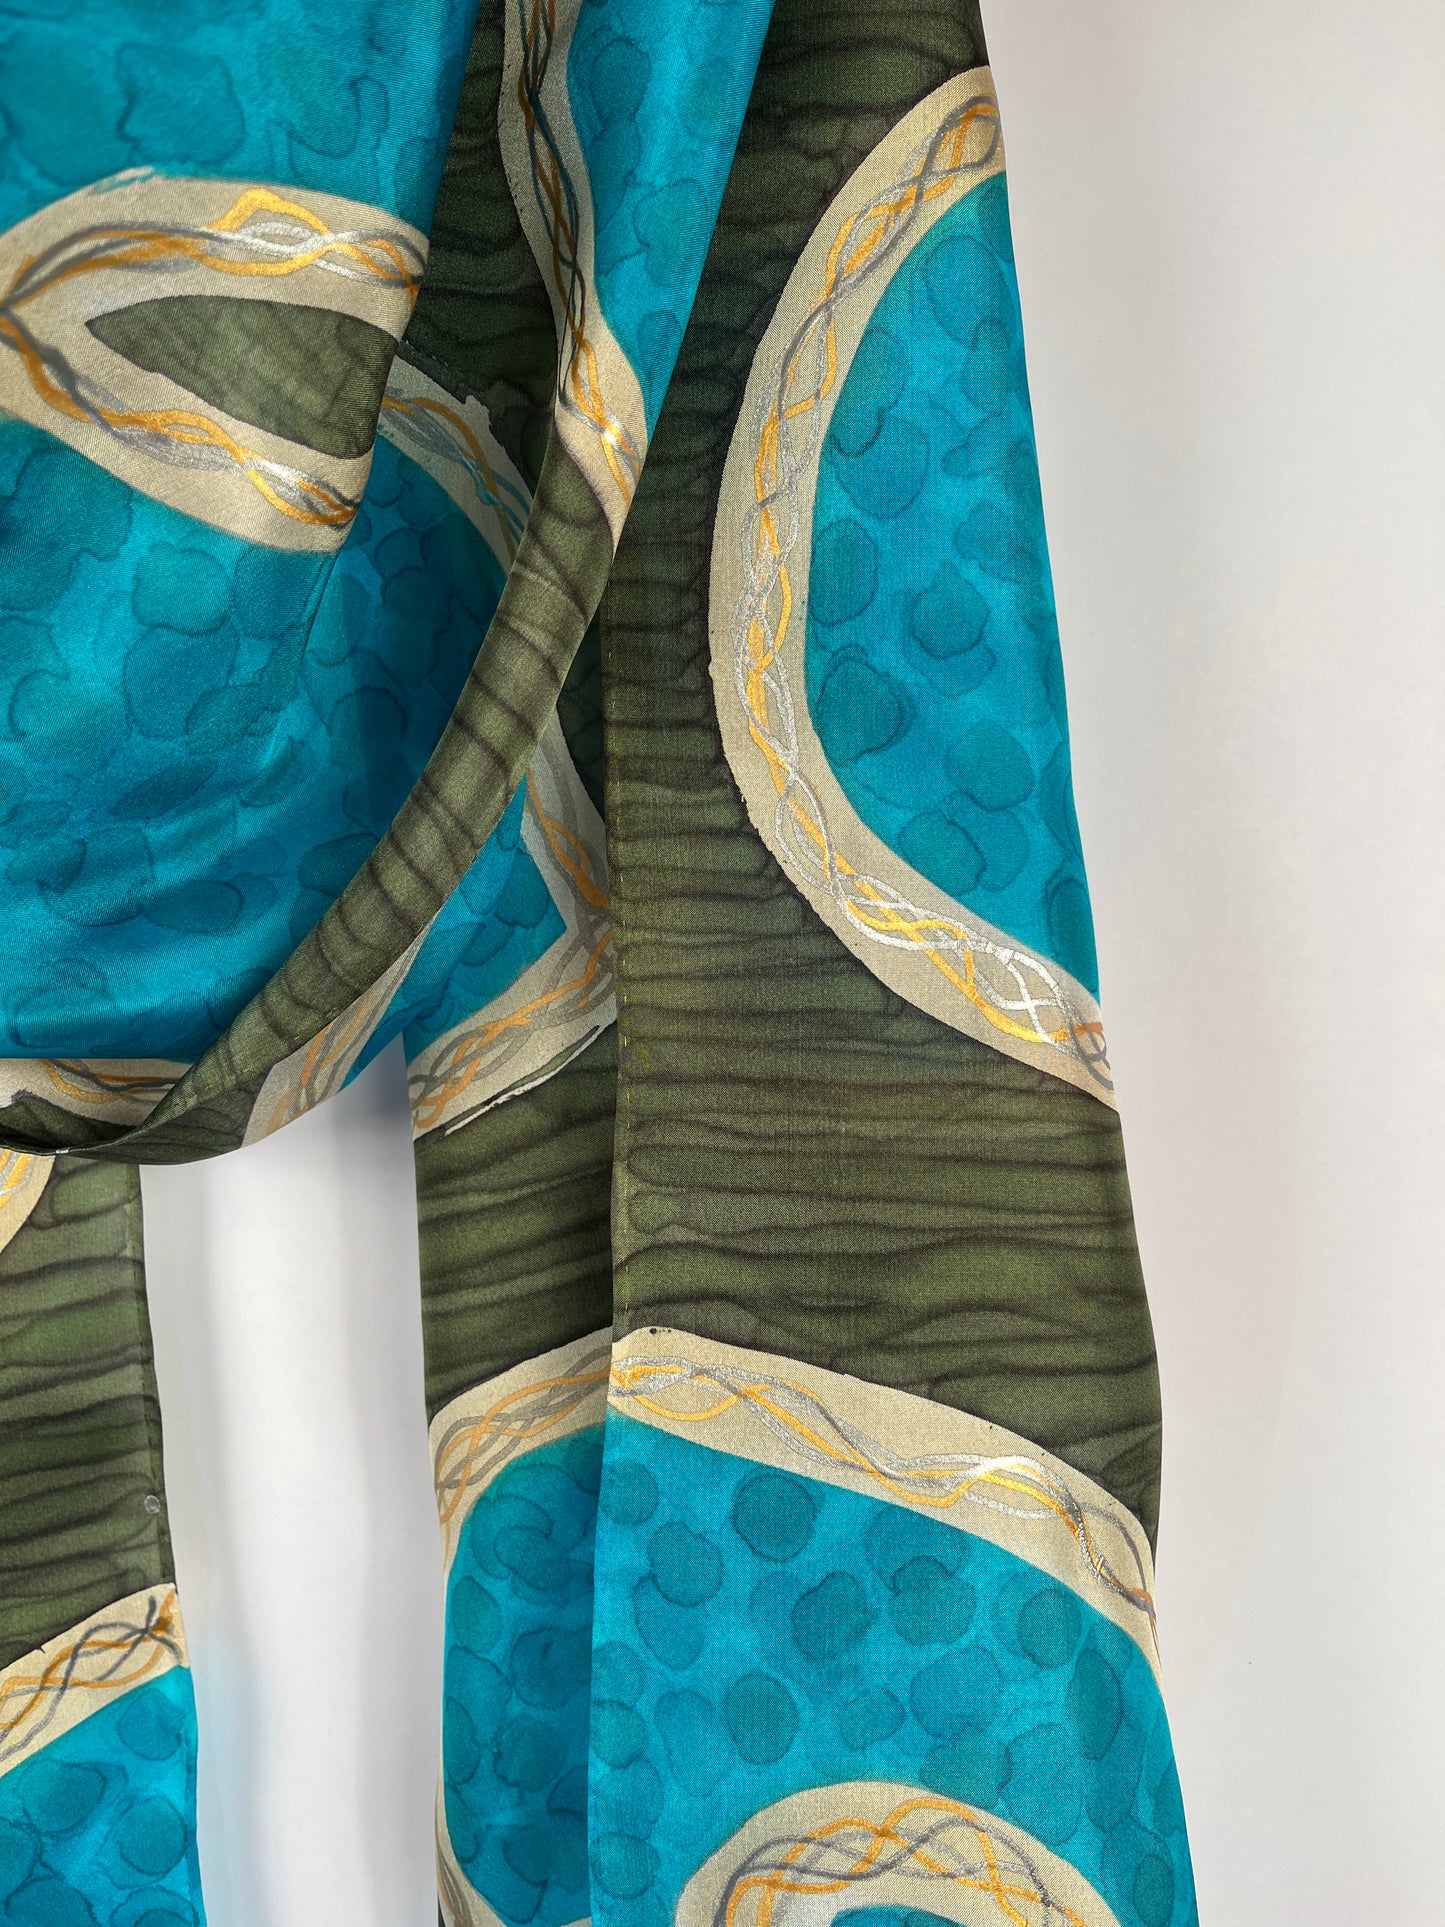 “Turquoise in the Wild" - Hand-dyed Silk Scarf - $125